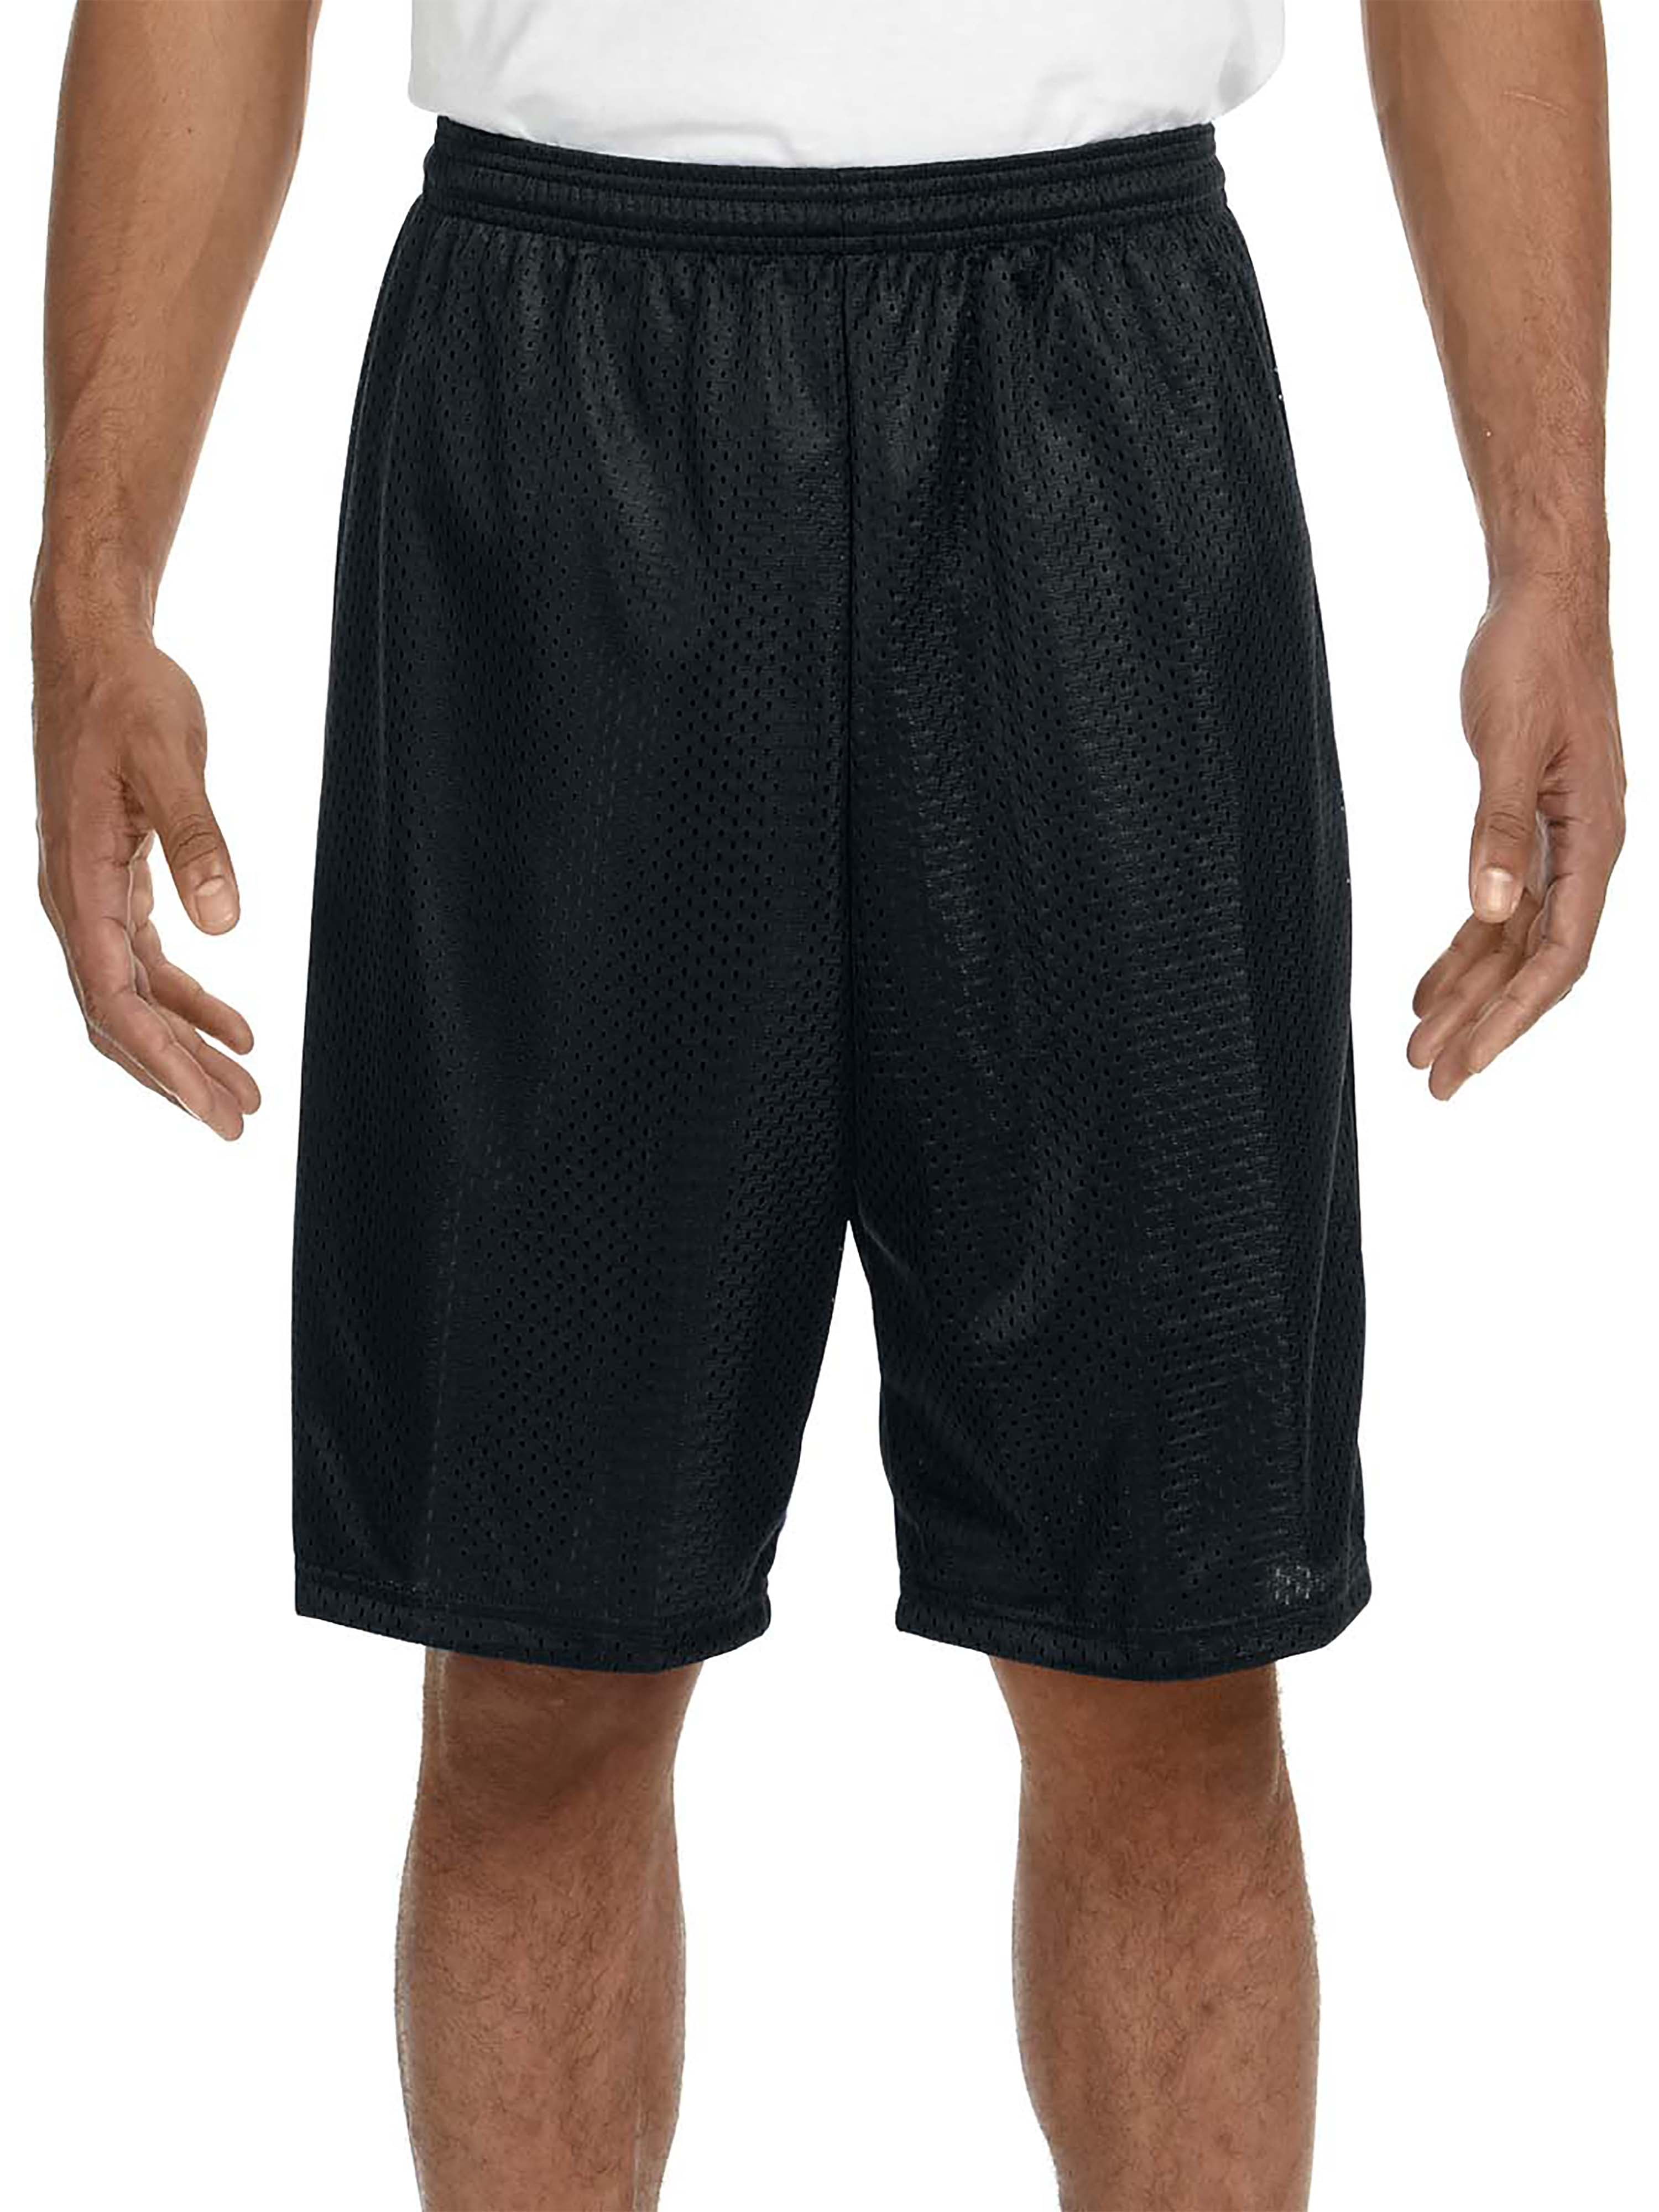 Ma Croix Men's Mesh Shorts With Pockets Gym Basketball Activewear ...